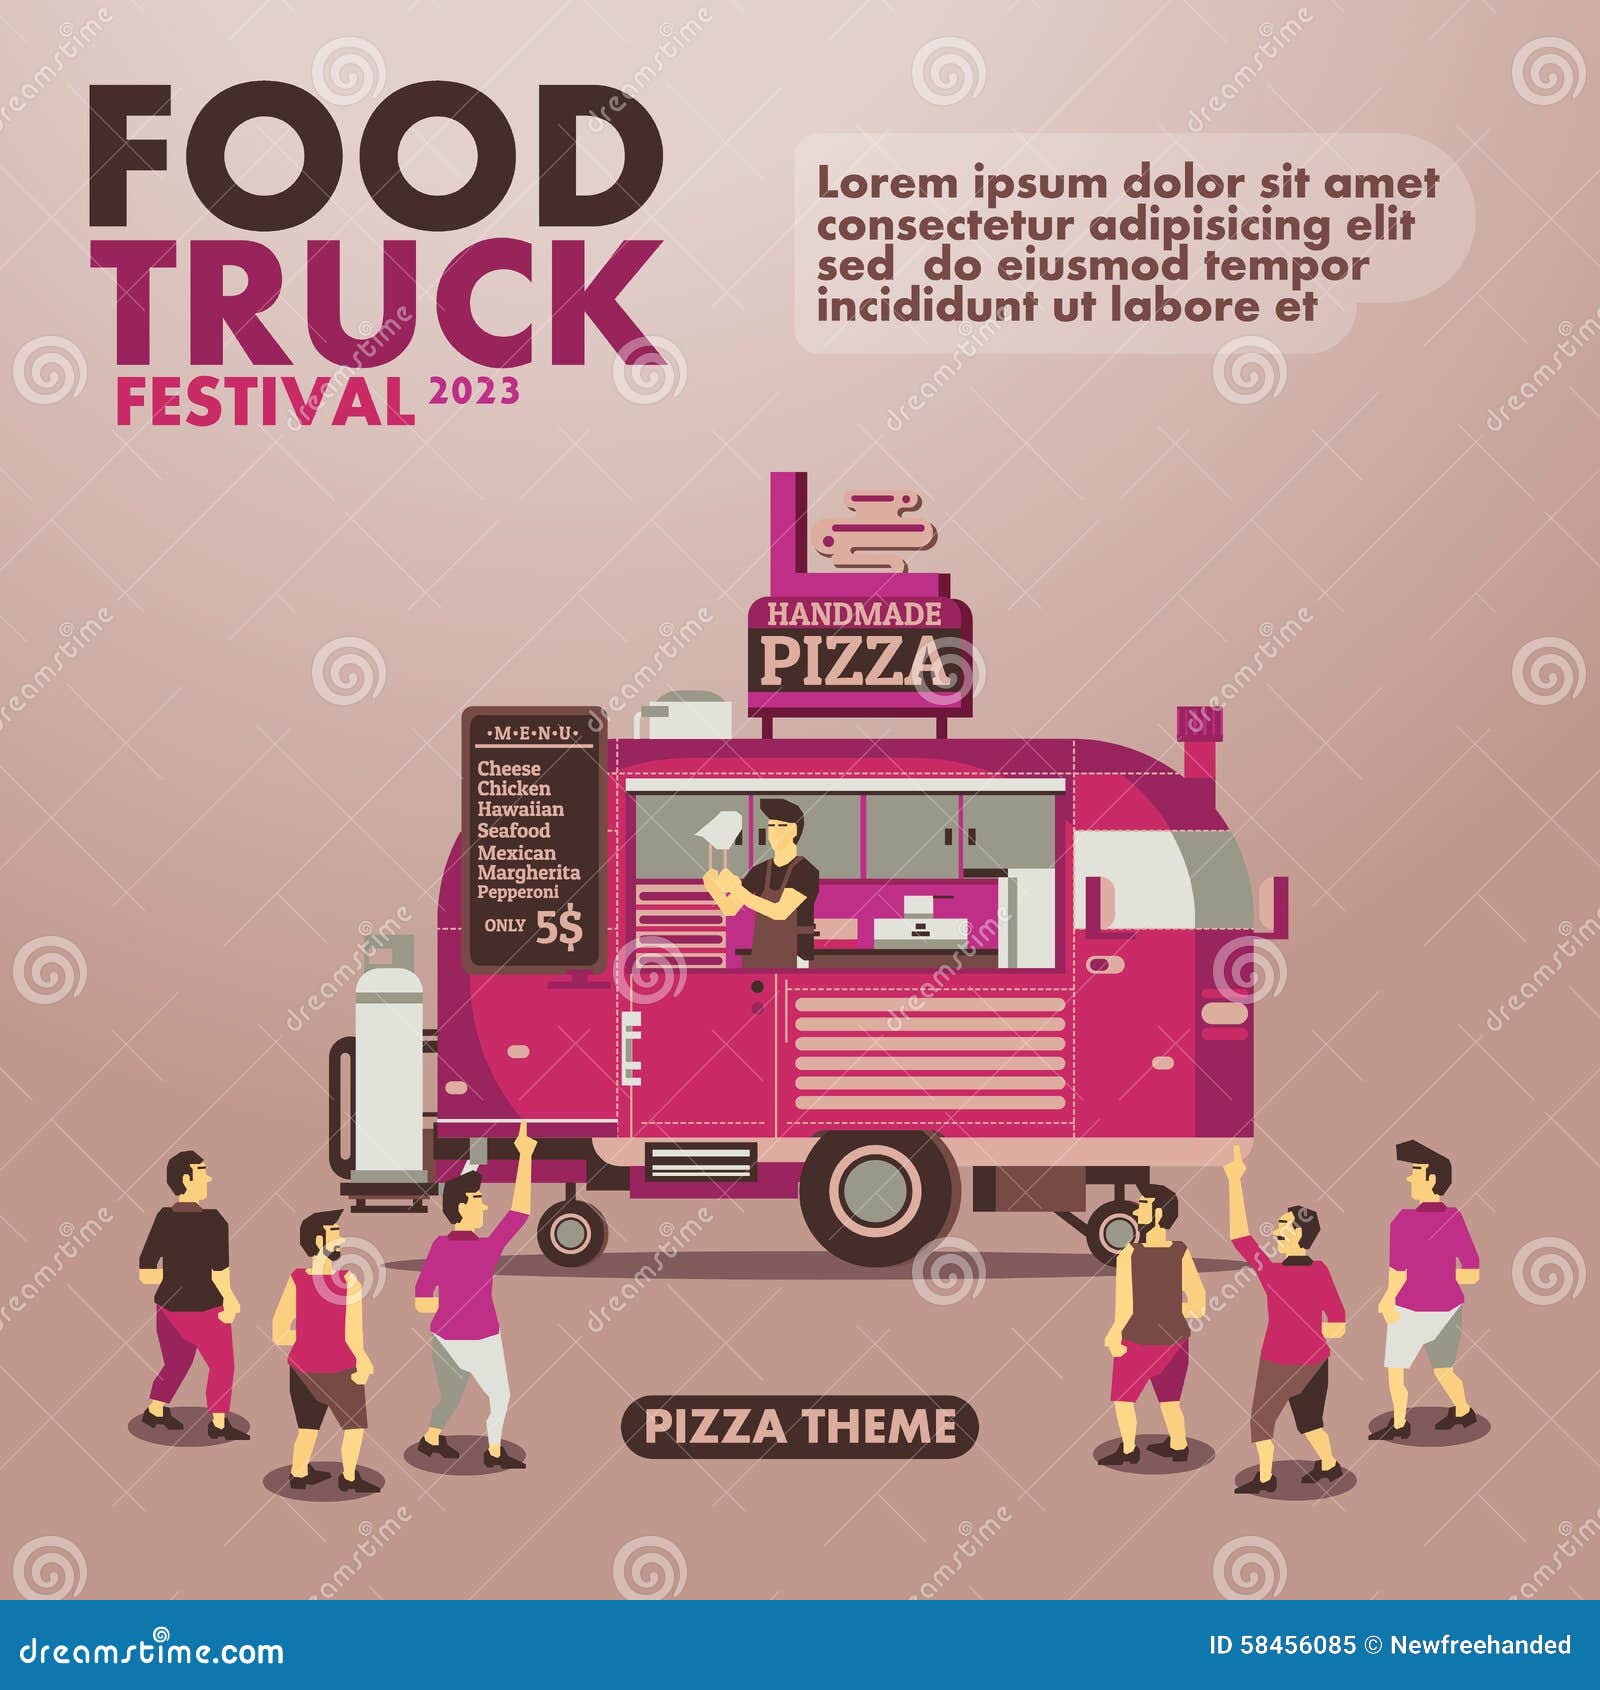 Food Truck Festival Poster with Gourmet,Pizza Theme Stock Illustration ...